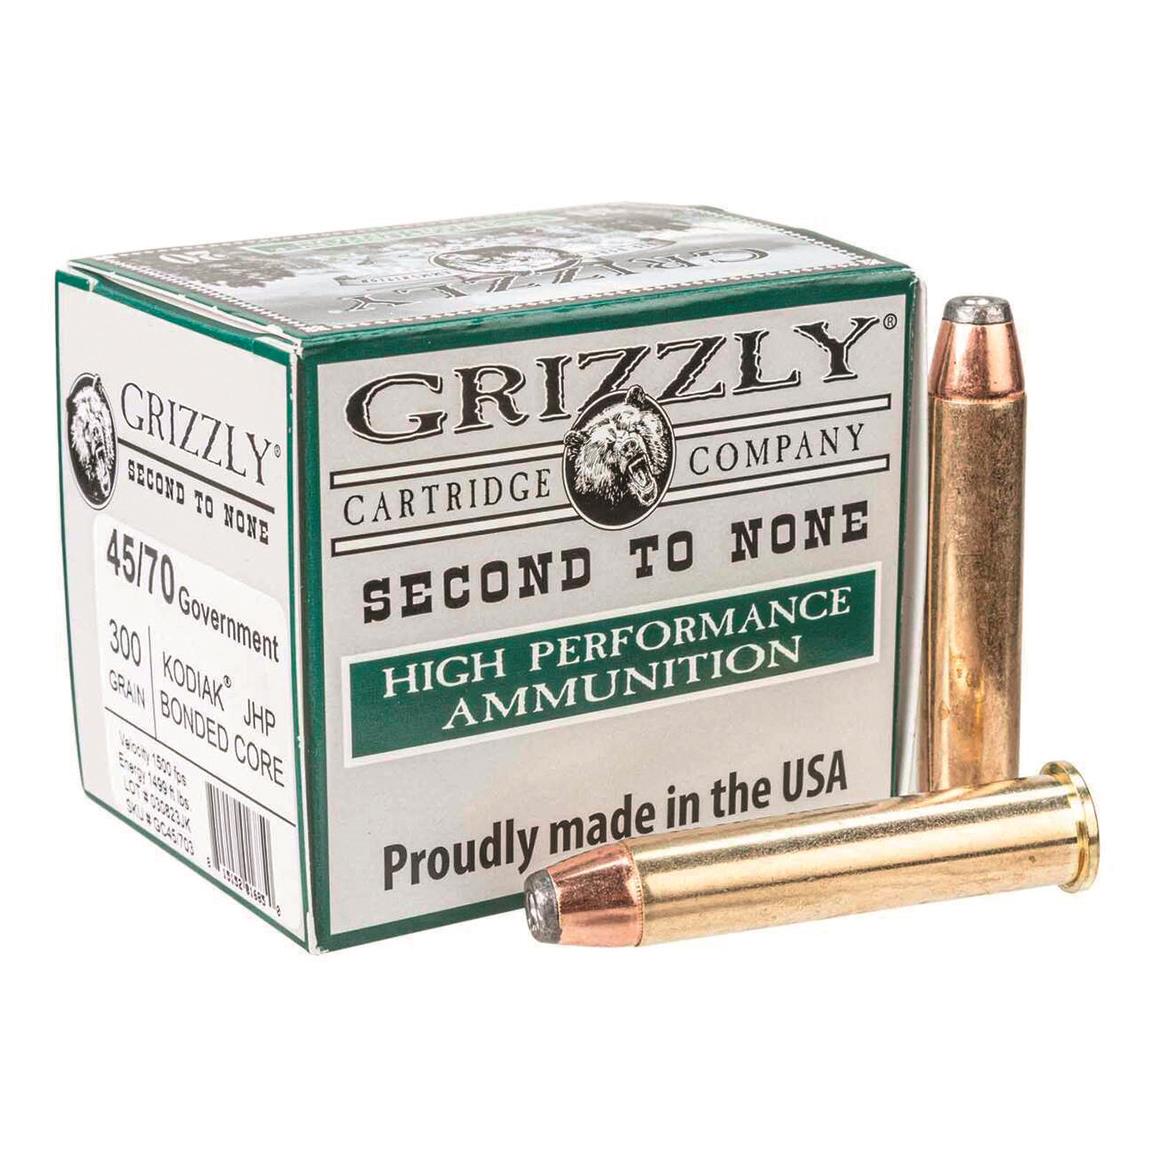 Grizzly Cartridge Co. High Performance, .45-70 Government, JHP, 300 Grain, 20 Rounds